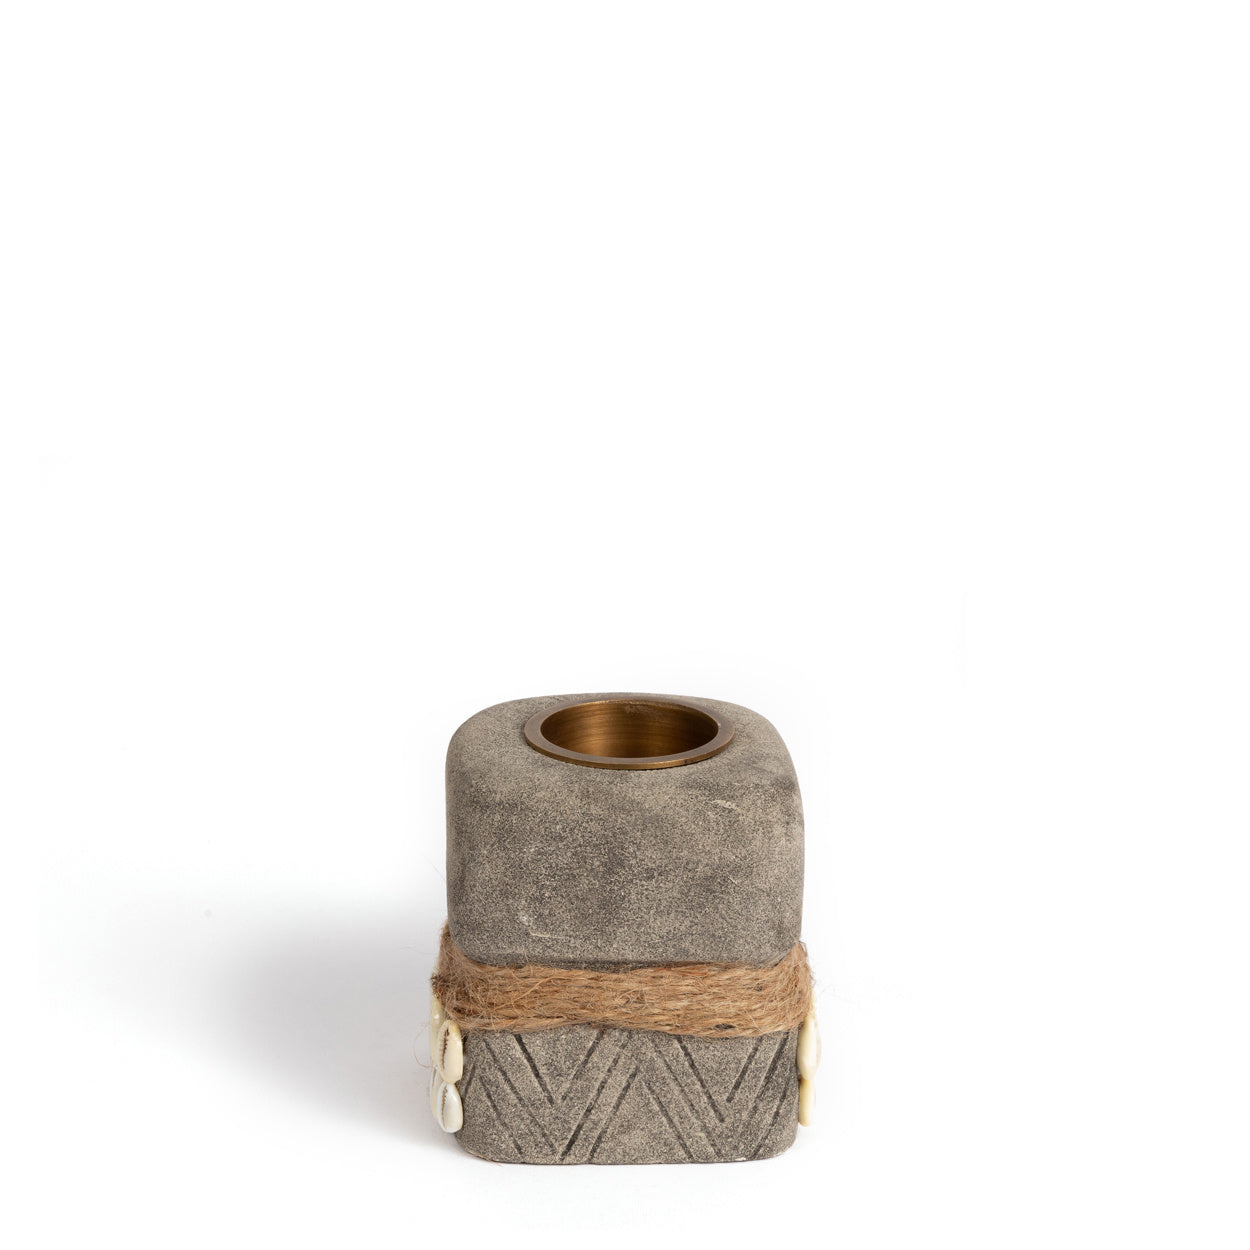 THE SUMBA STONE #31 Candle Holder back view